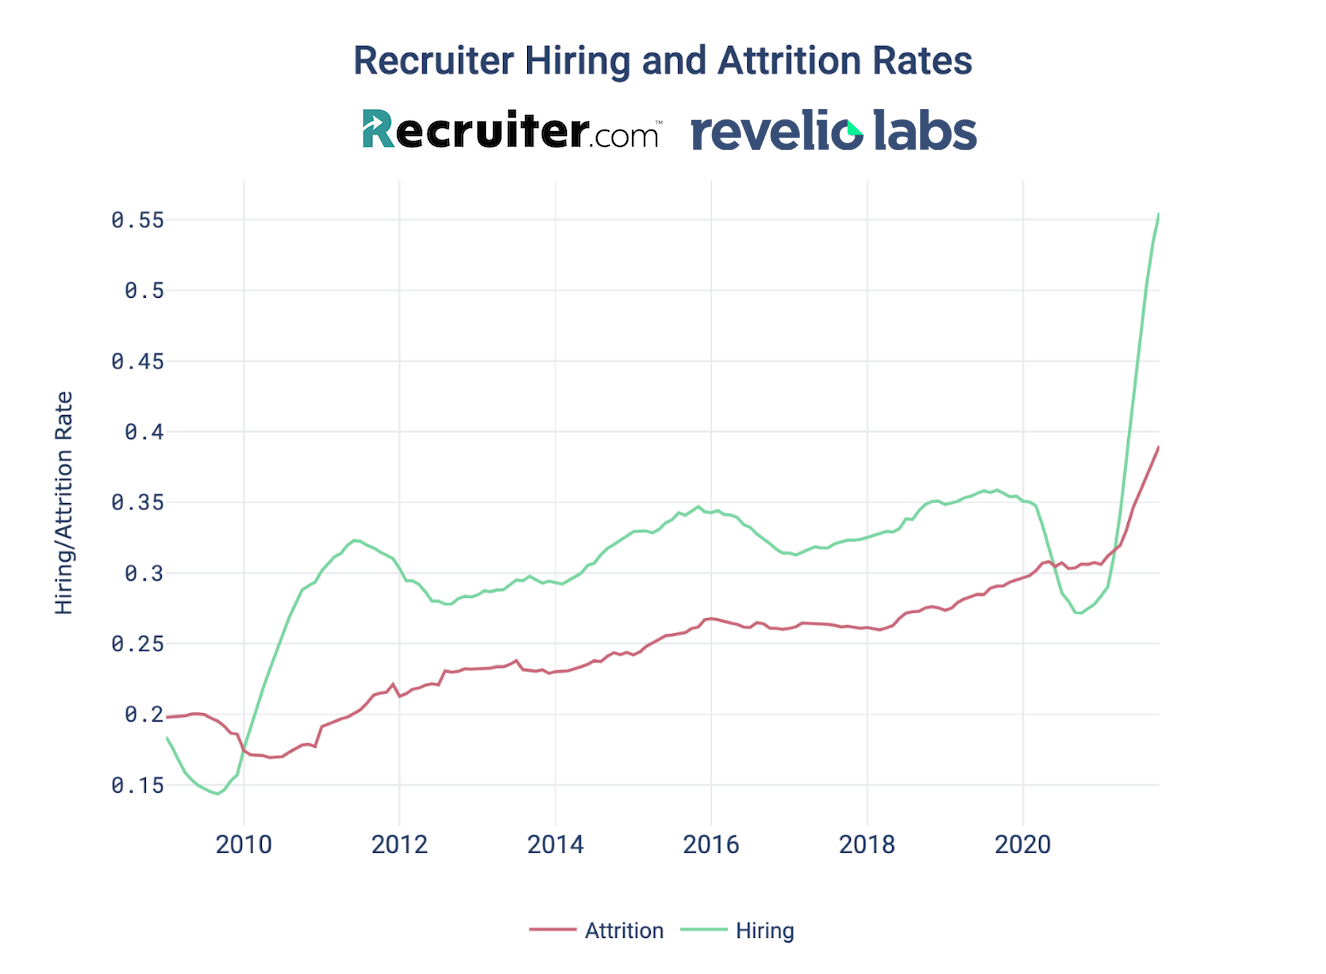 demand for recruiters